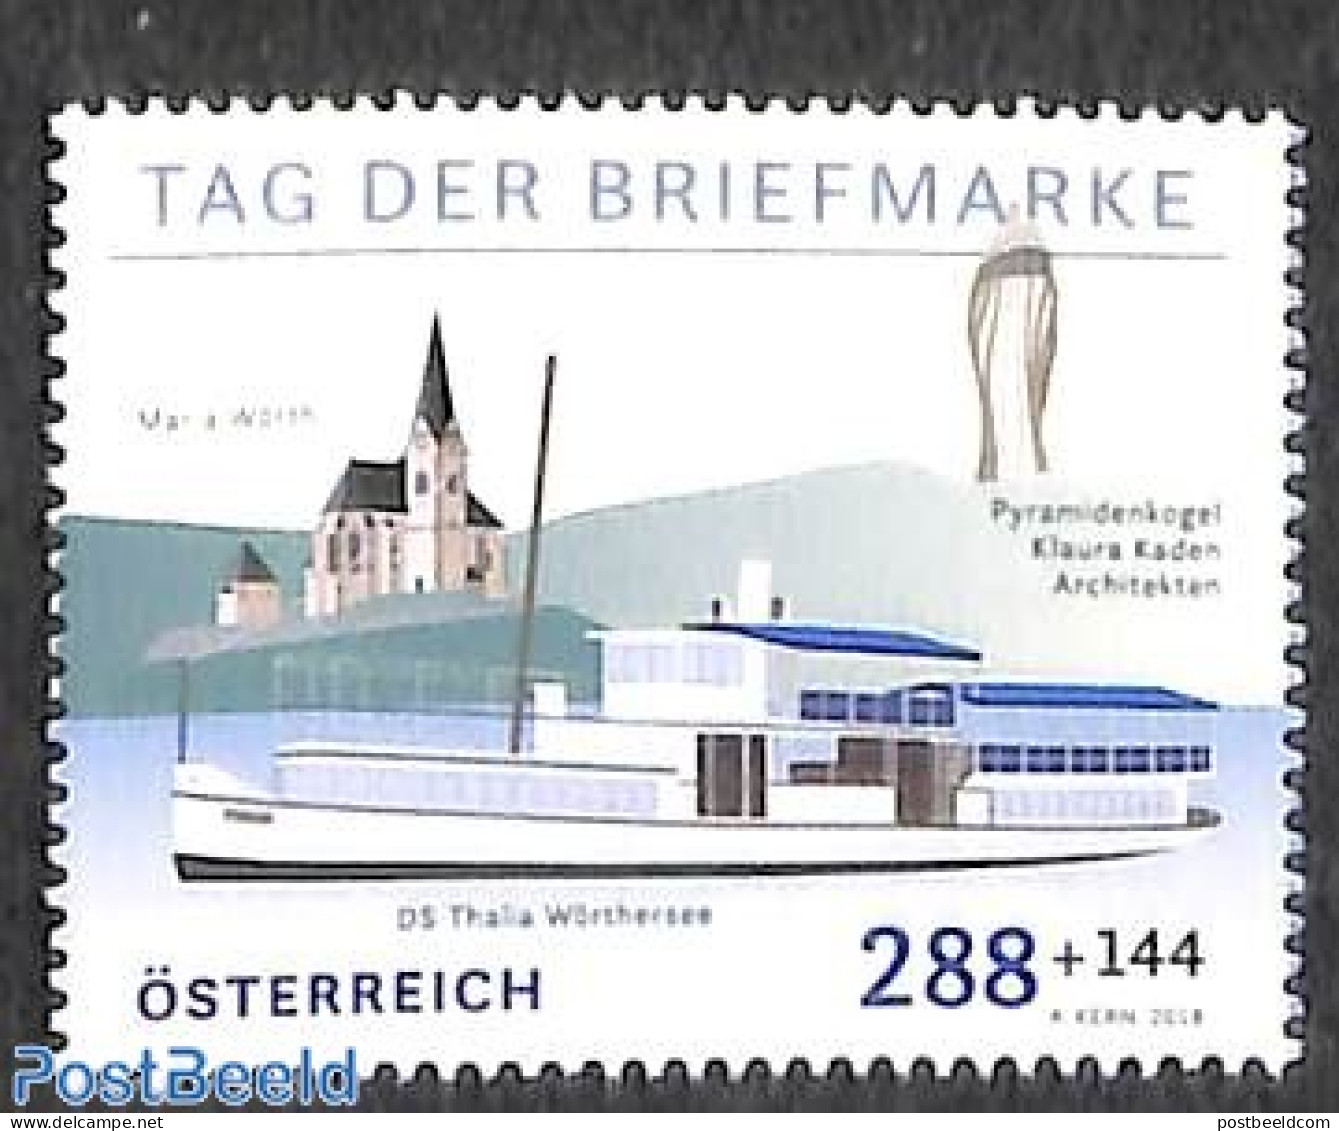 Austria 2018 Stamp Day 1v, Mint NH, Religion - Transport - Churches, Temples, Mosques, Synagogues - Stamp Day - Ships .. - Ongebruikt